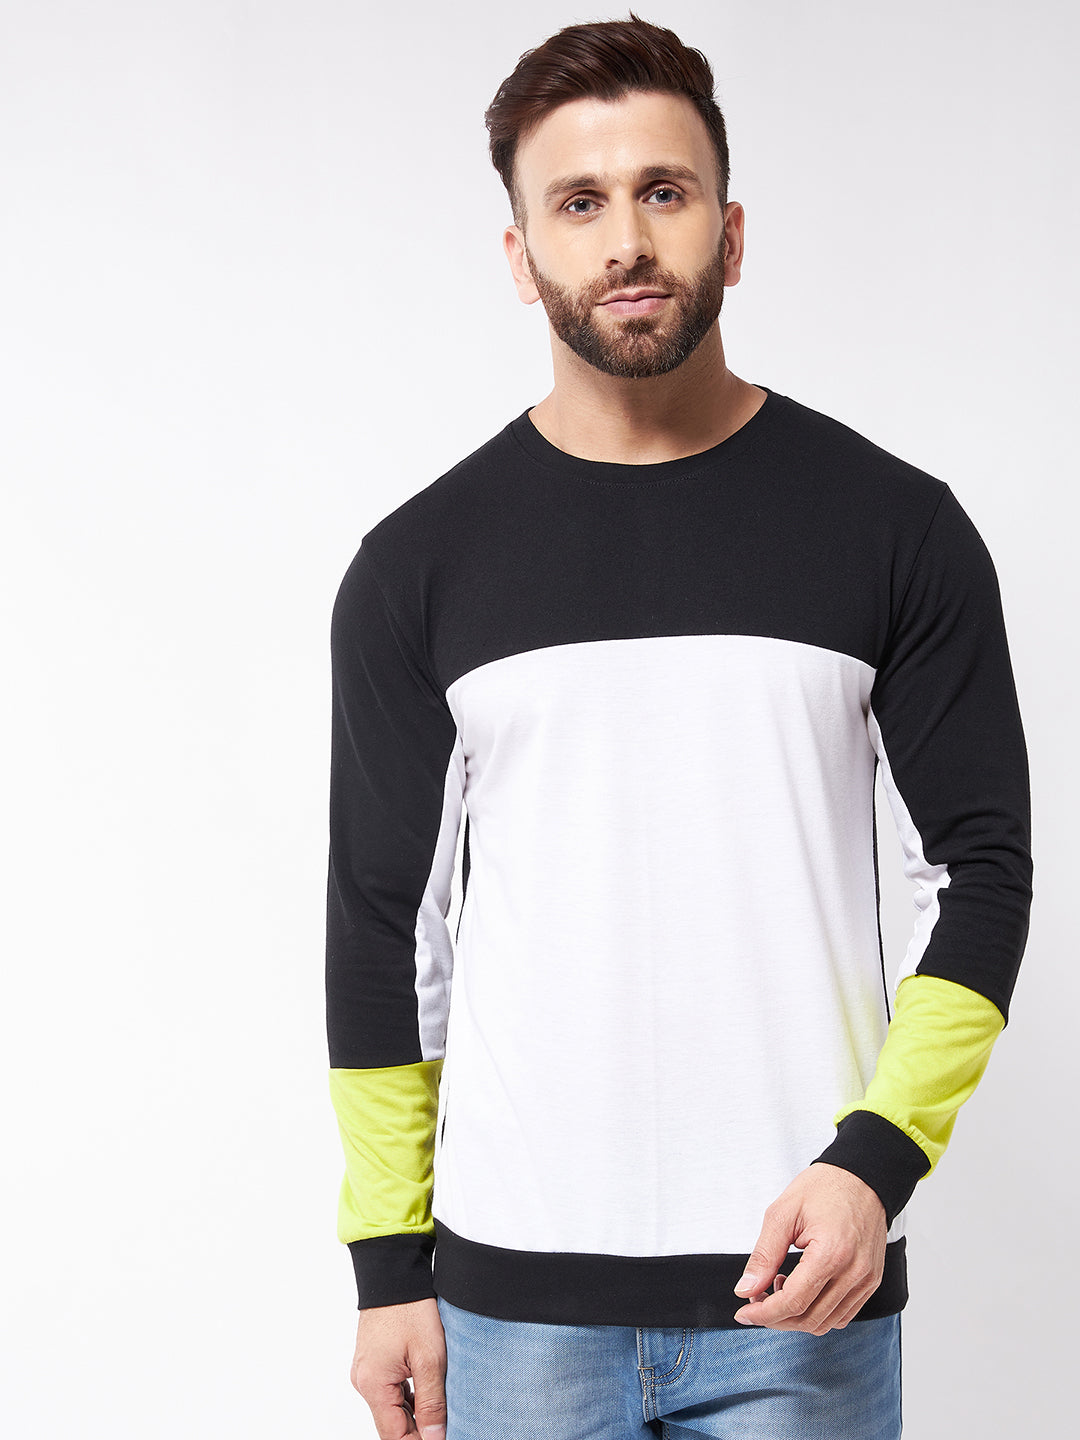 Oversized Black and White Color Block  T-Shirt